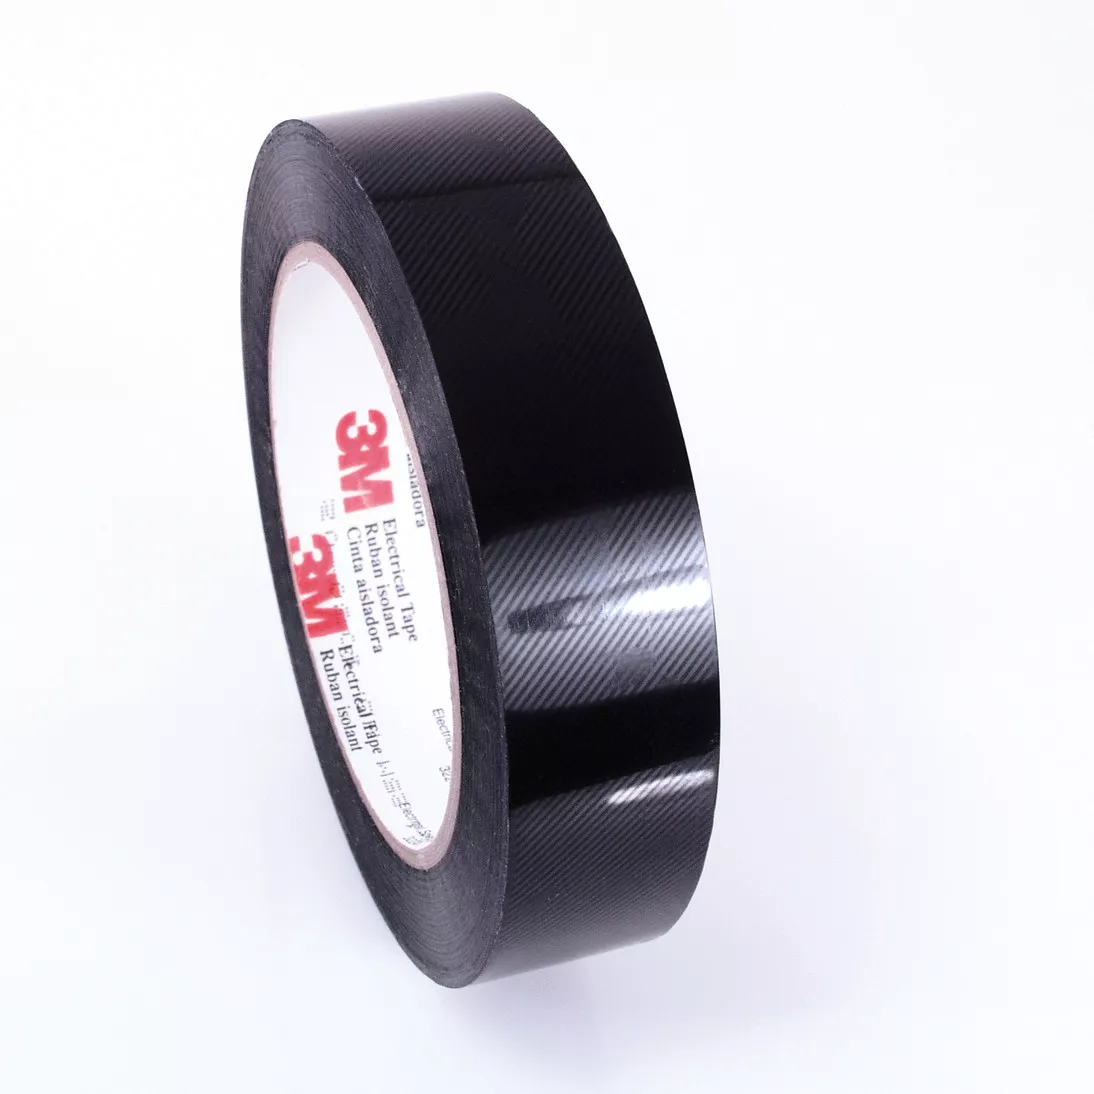 3M™ Polyester Film Electrical Tape 1318-1, Yellow, 1/2 in X 72 yd, 3-in
paper core, Log roll, 24 Rolls/Case